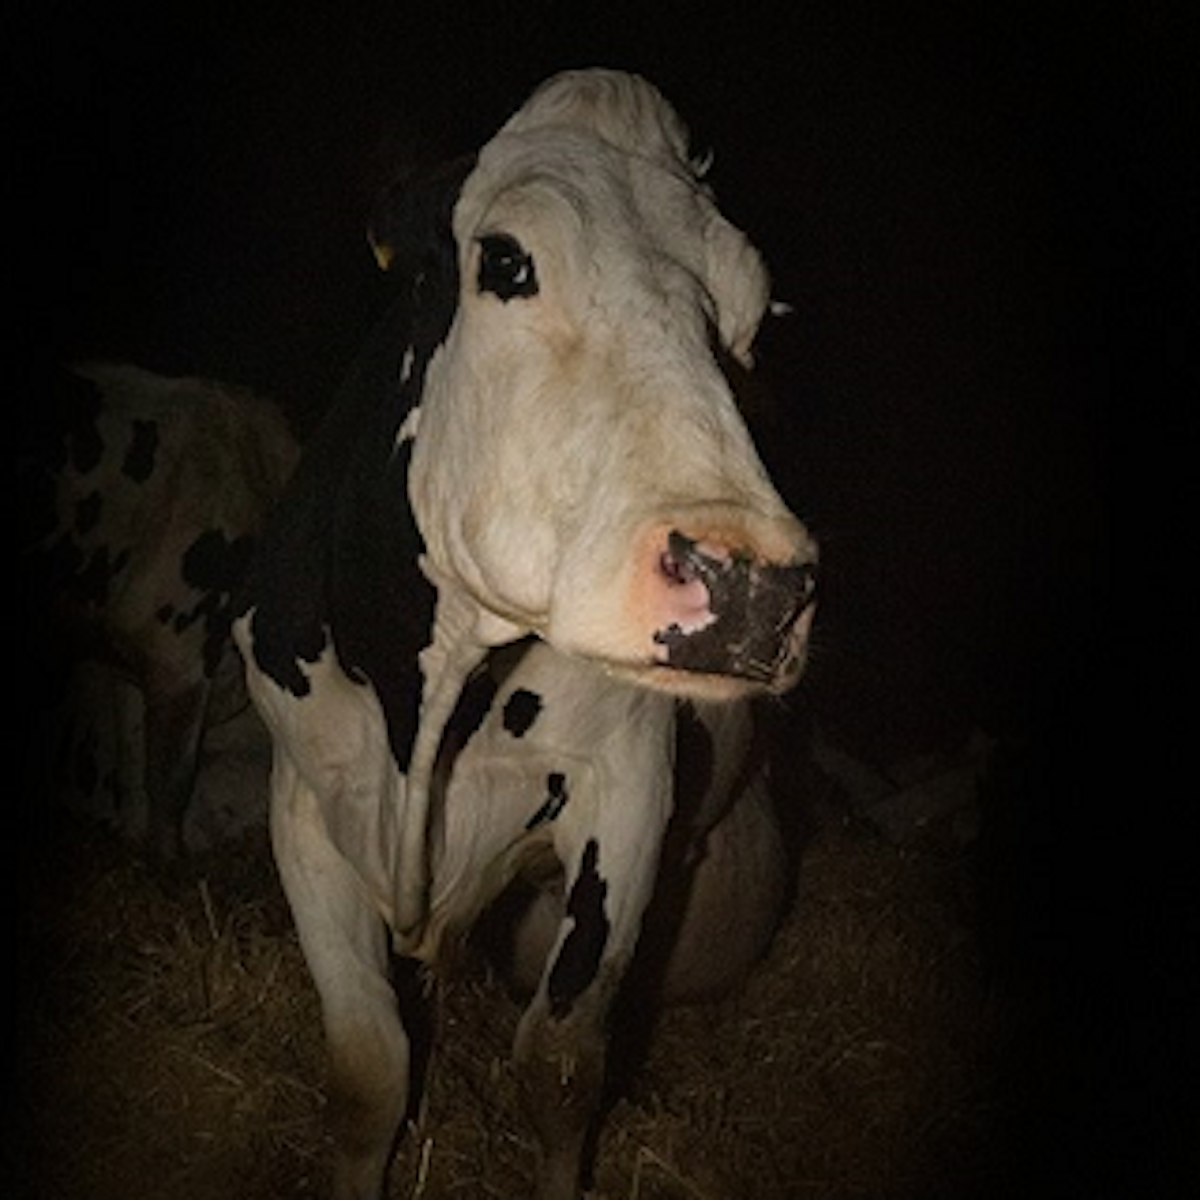 Cow documentary shows the need for fundamental legal rights for animals